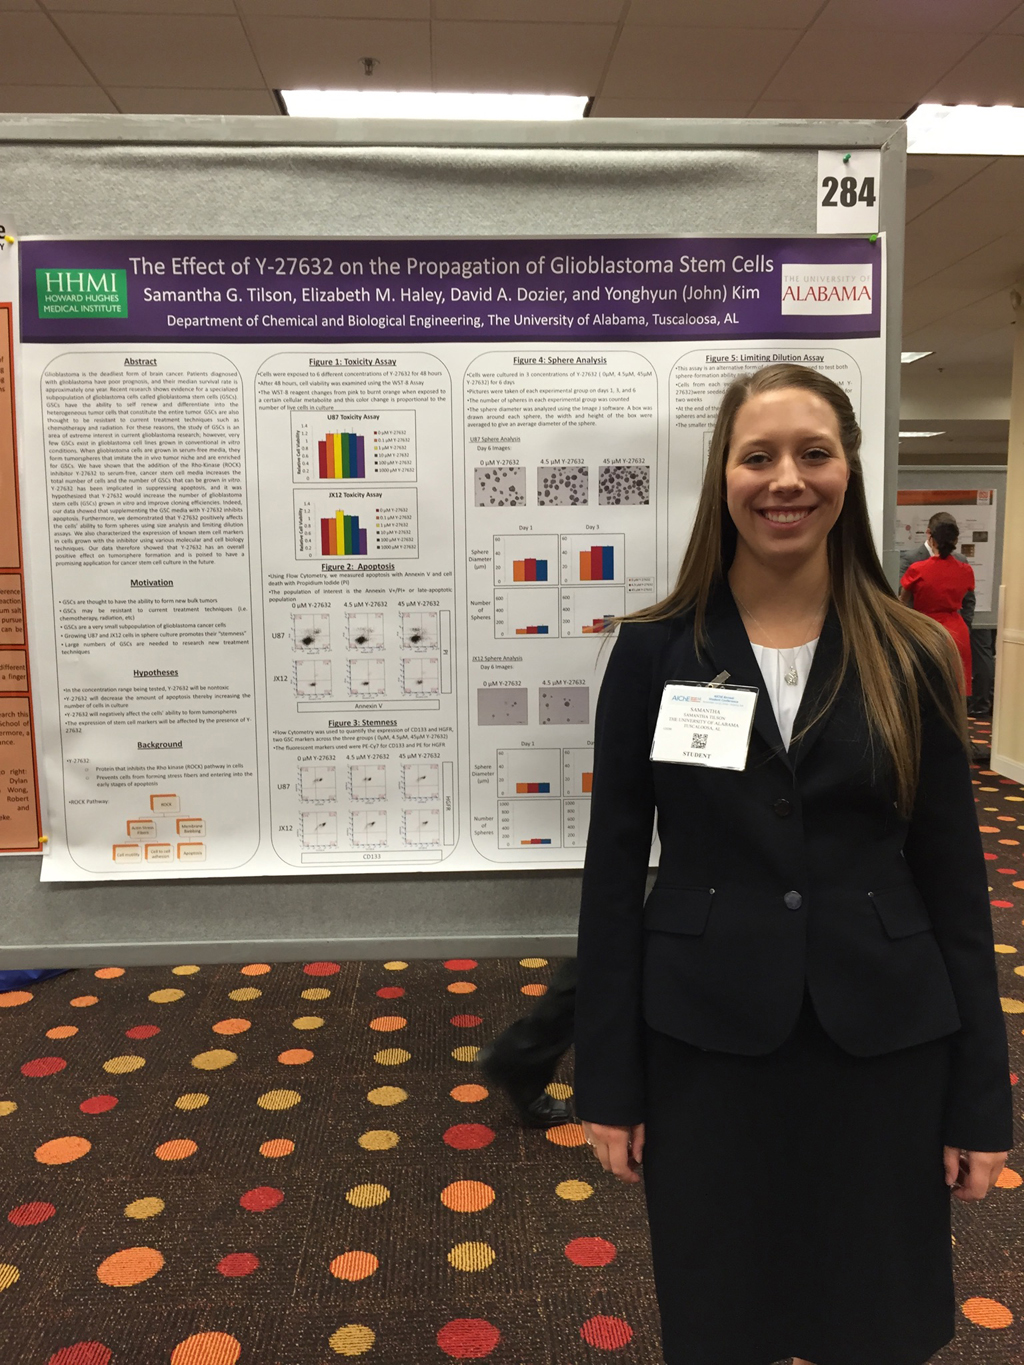 A female student in business attire standing in front of a research poster